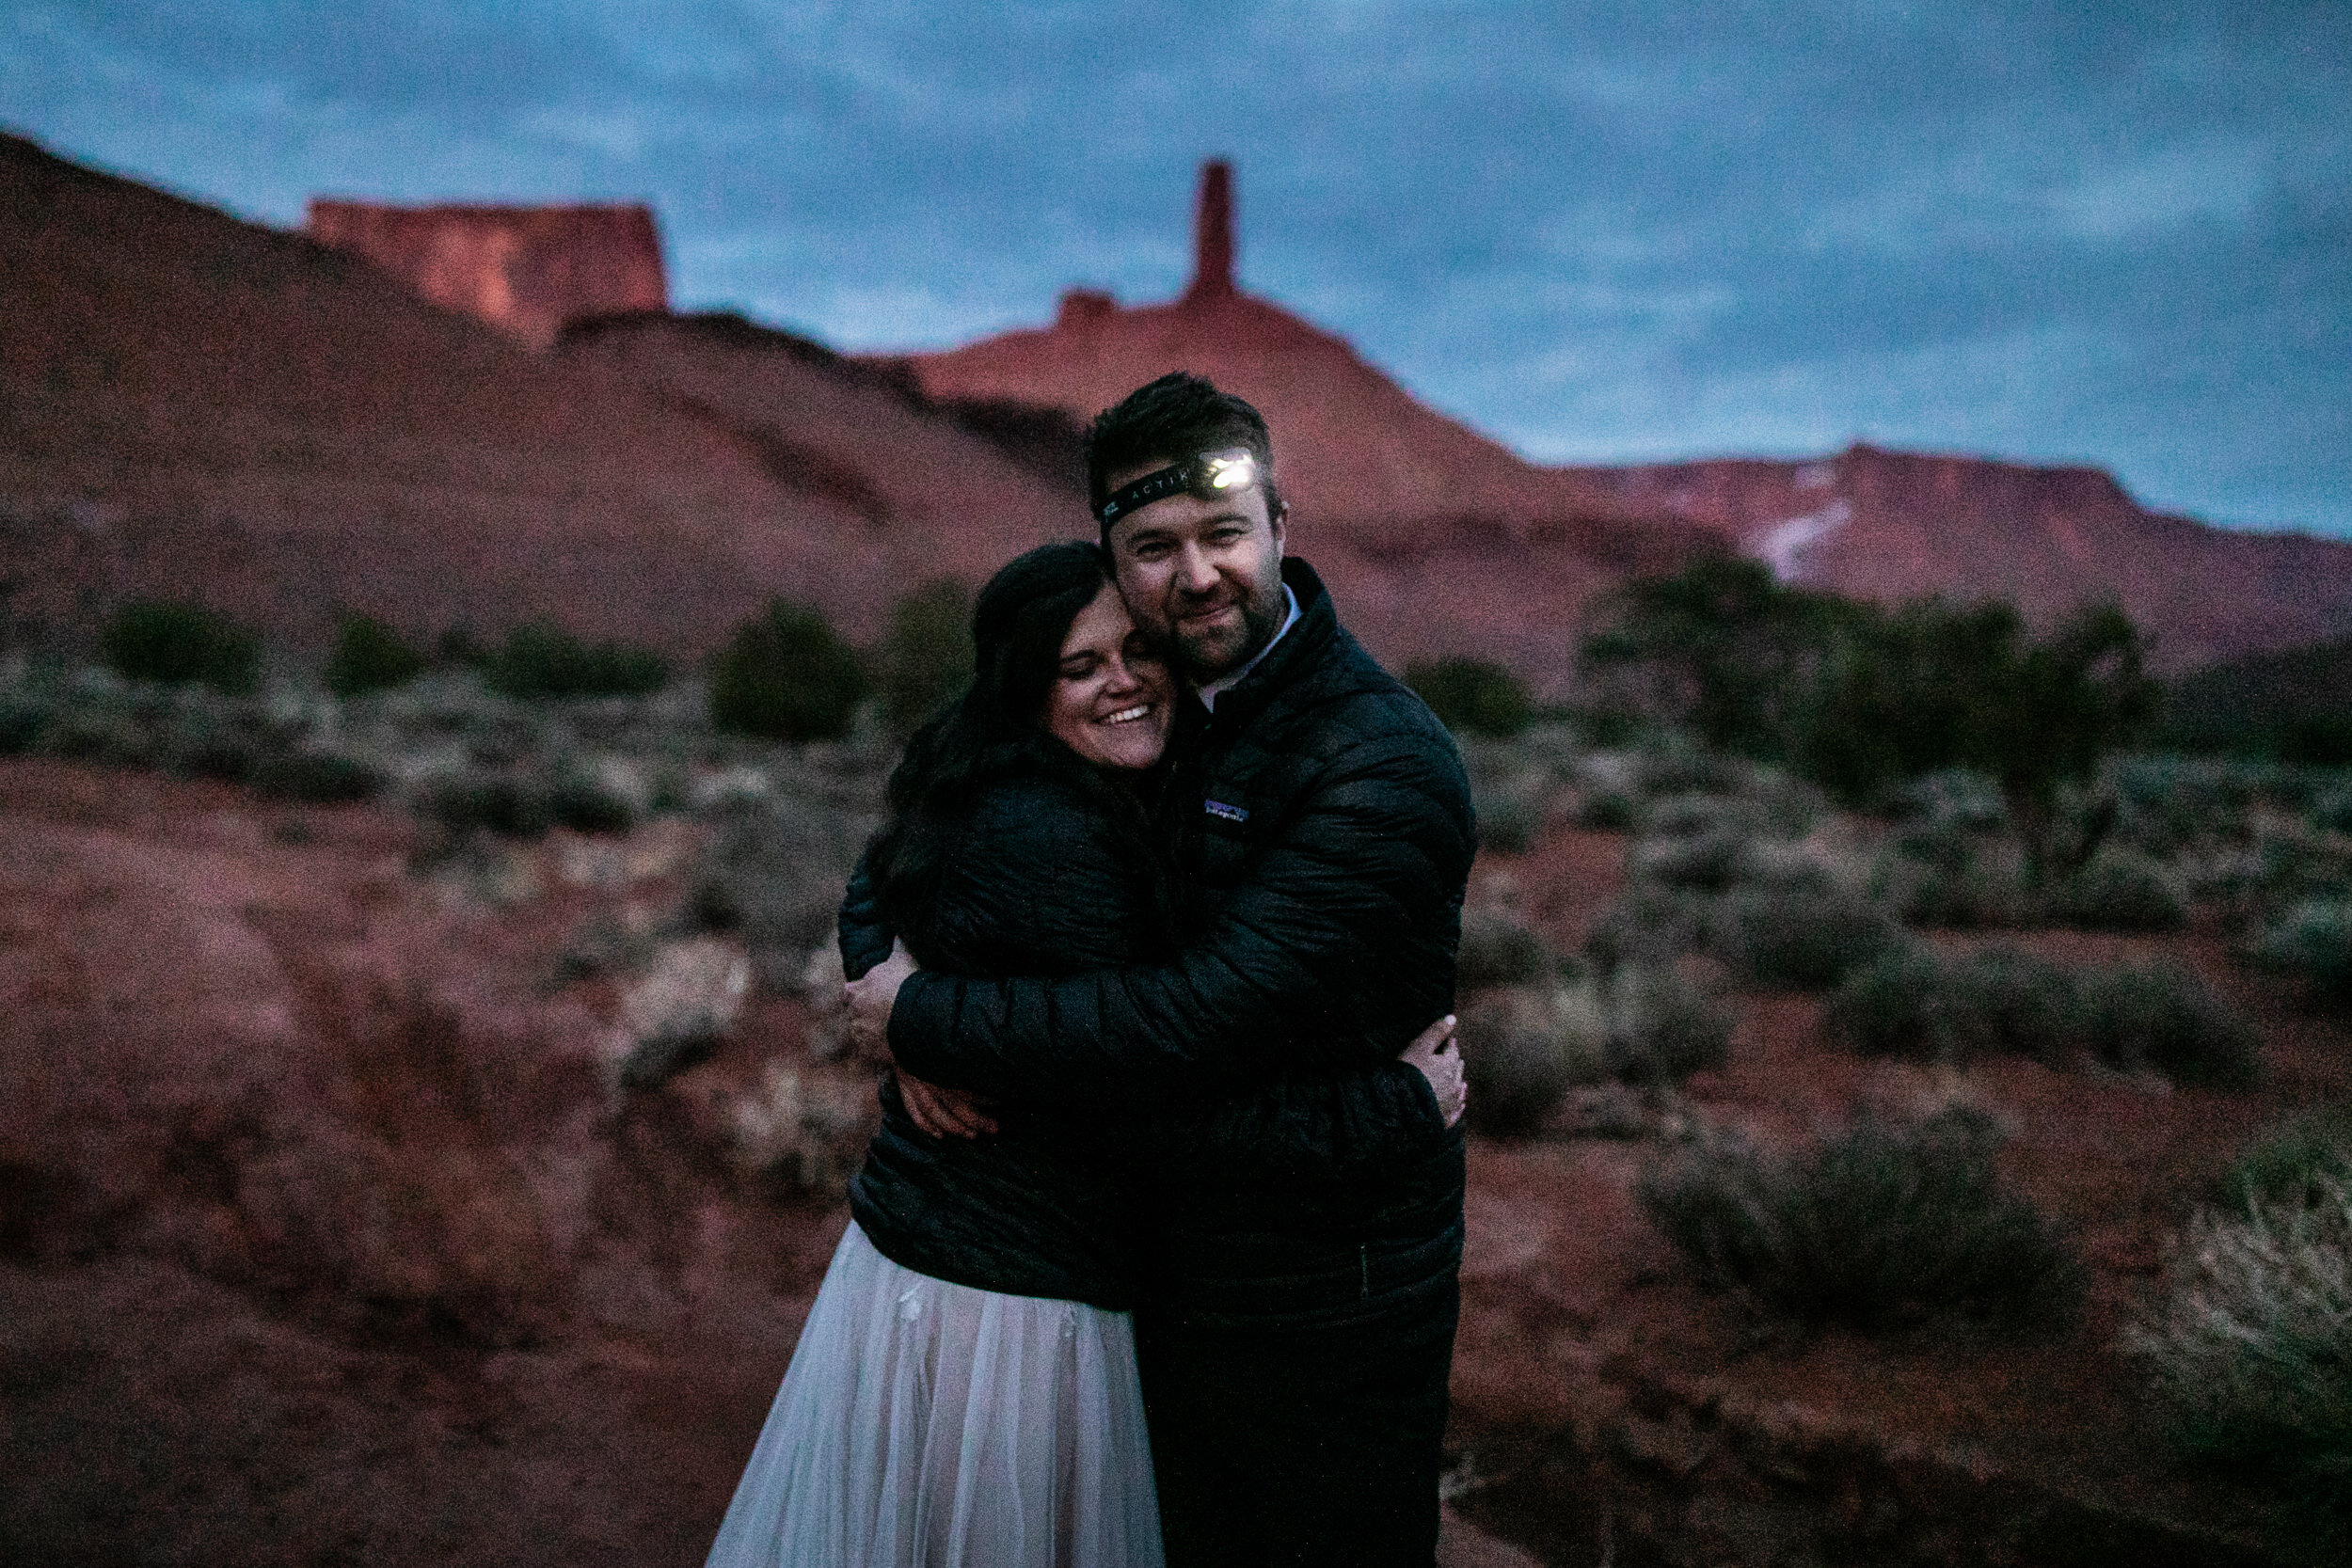 Intimate Moab Elopement | Small Family Wedding | The Hearnes Photography